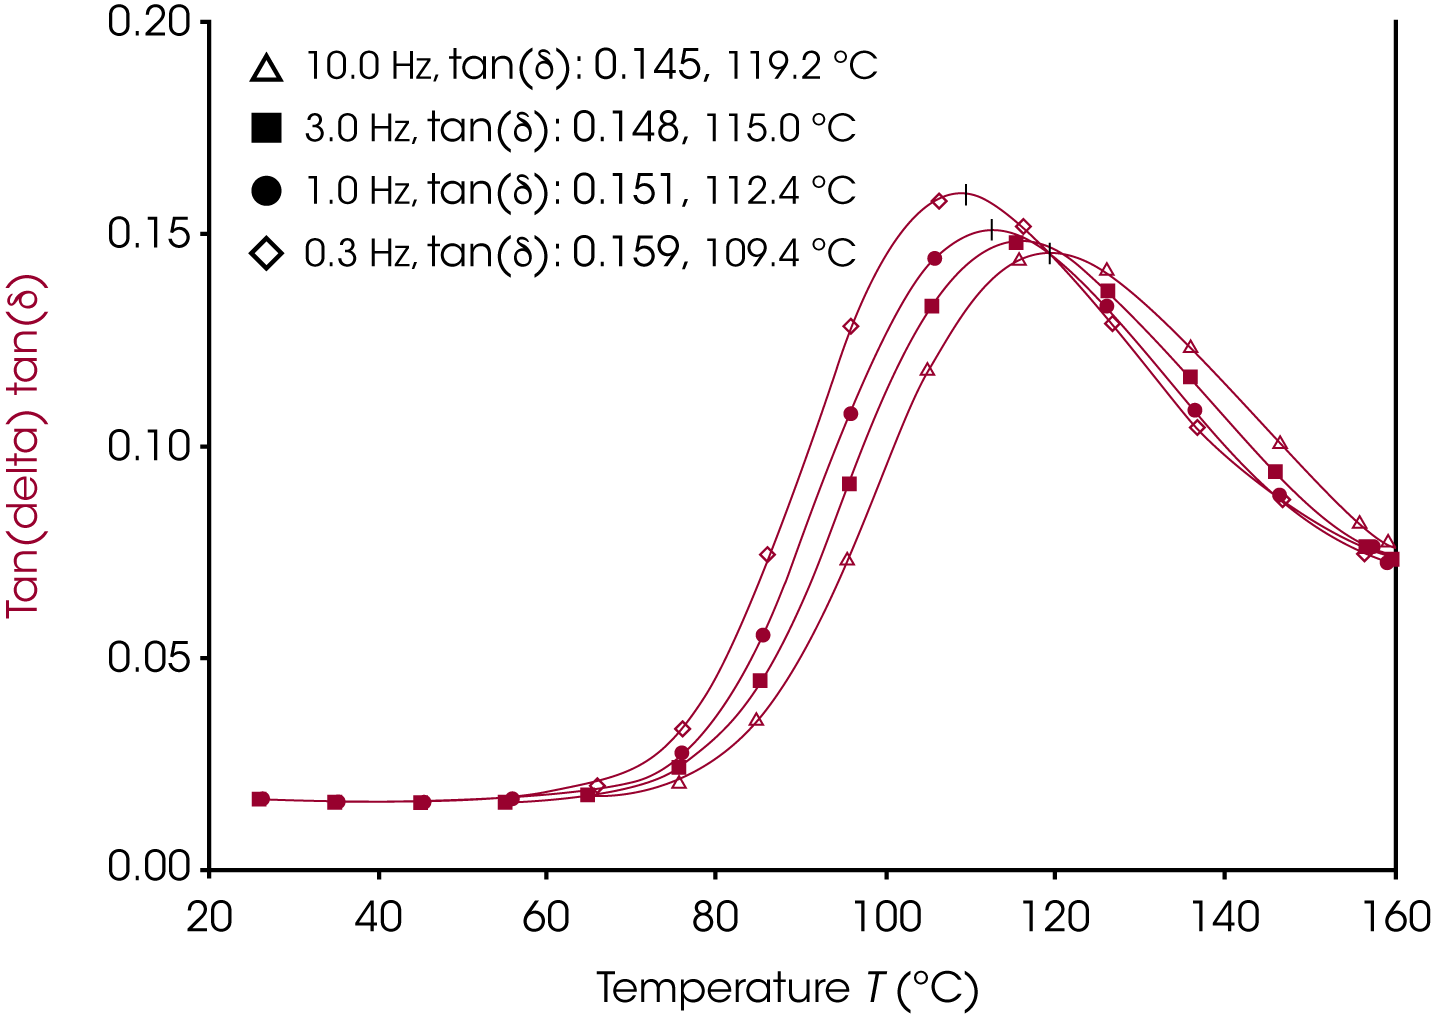 Figure 4. Tan (δ) values of a PET film at multiple frequencies with signal max values and glass transition temperatures.